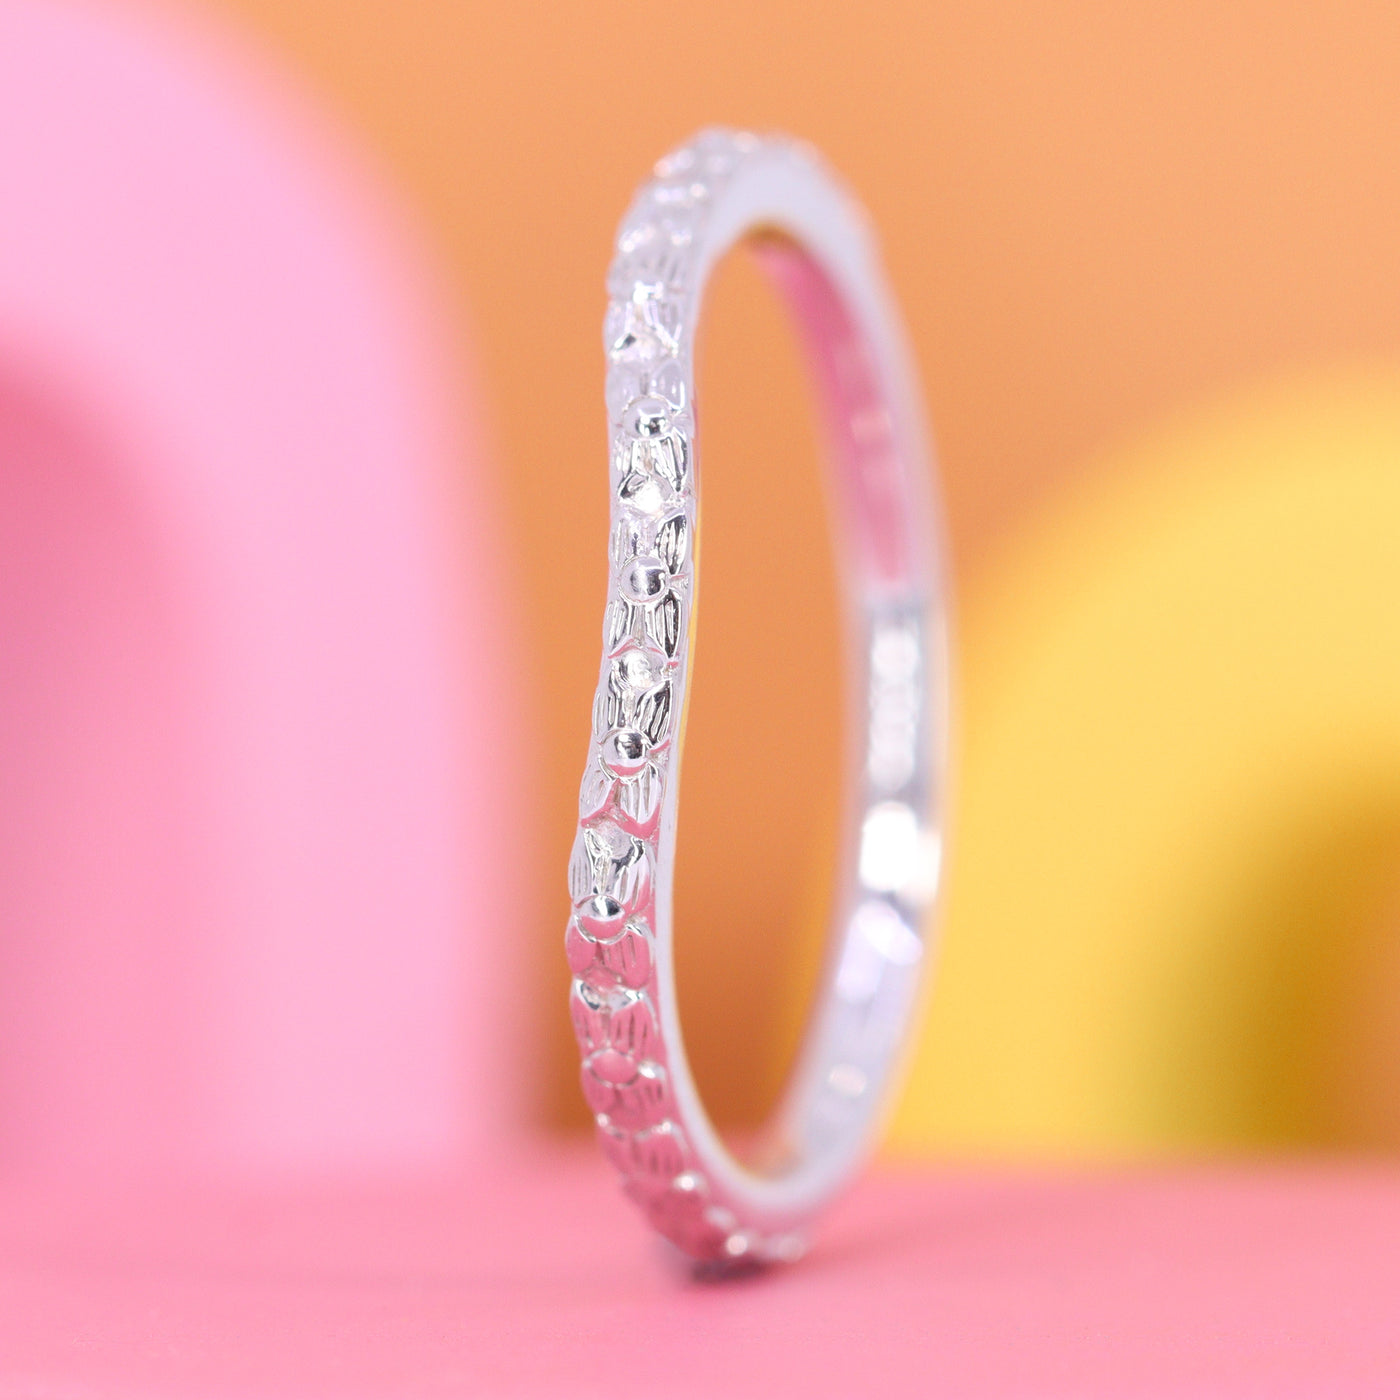 Flora - Floral Pattern Shaped Wedding Band - Made-to-Order